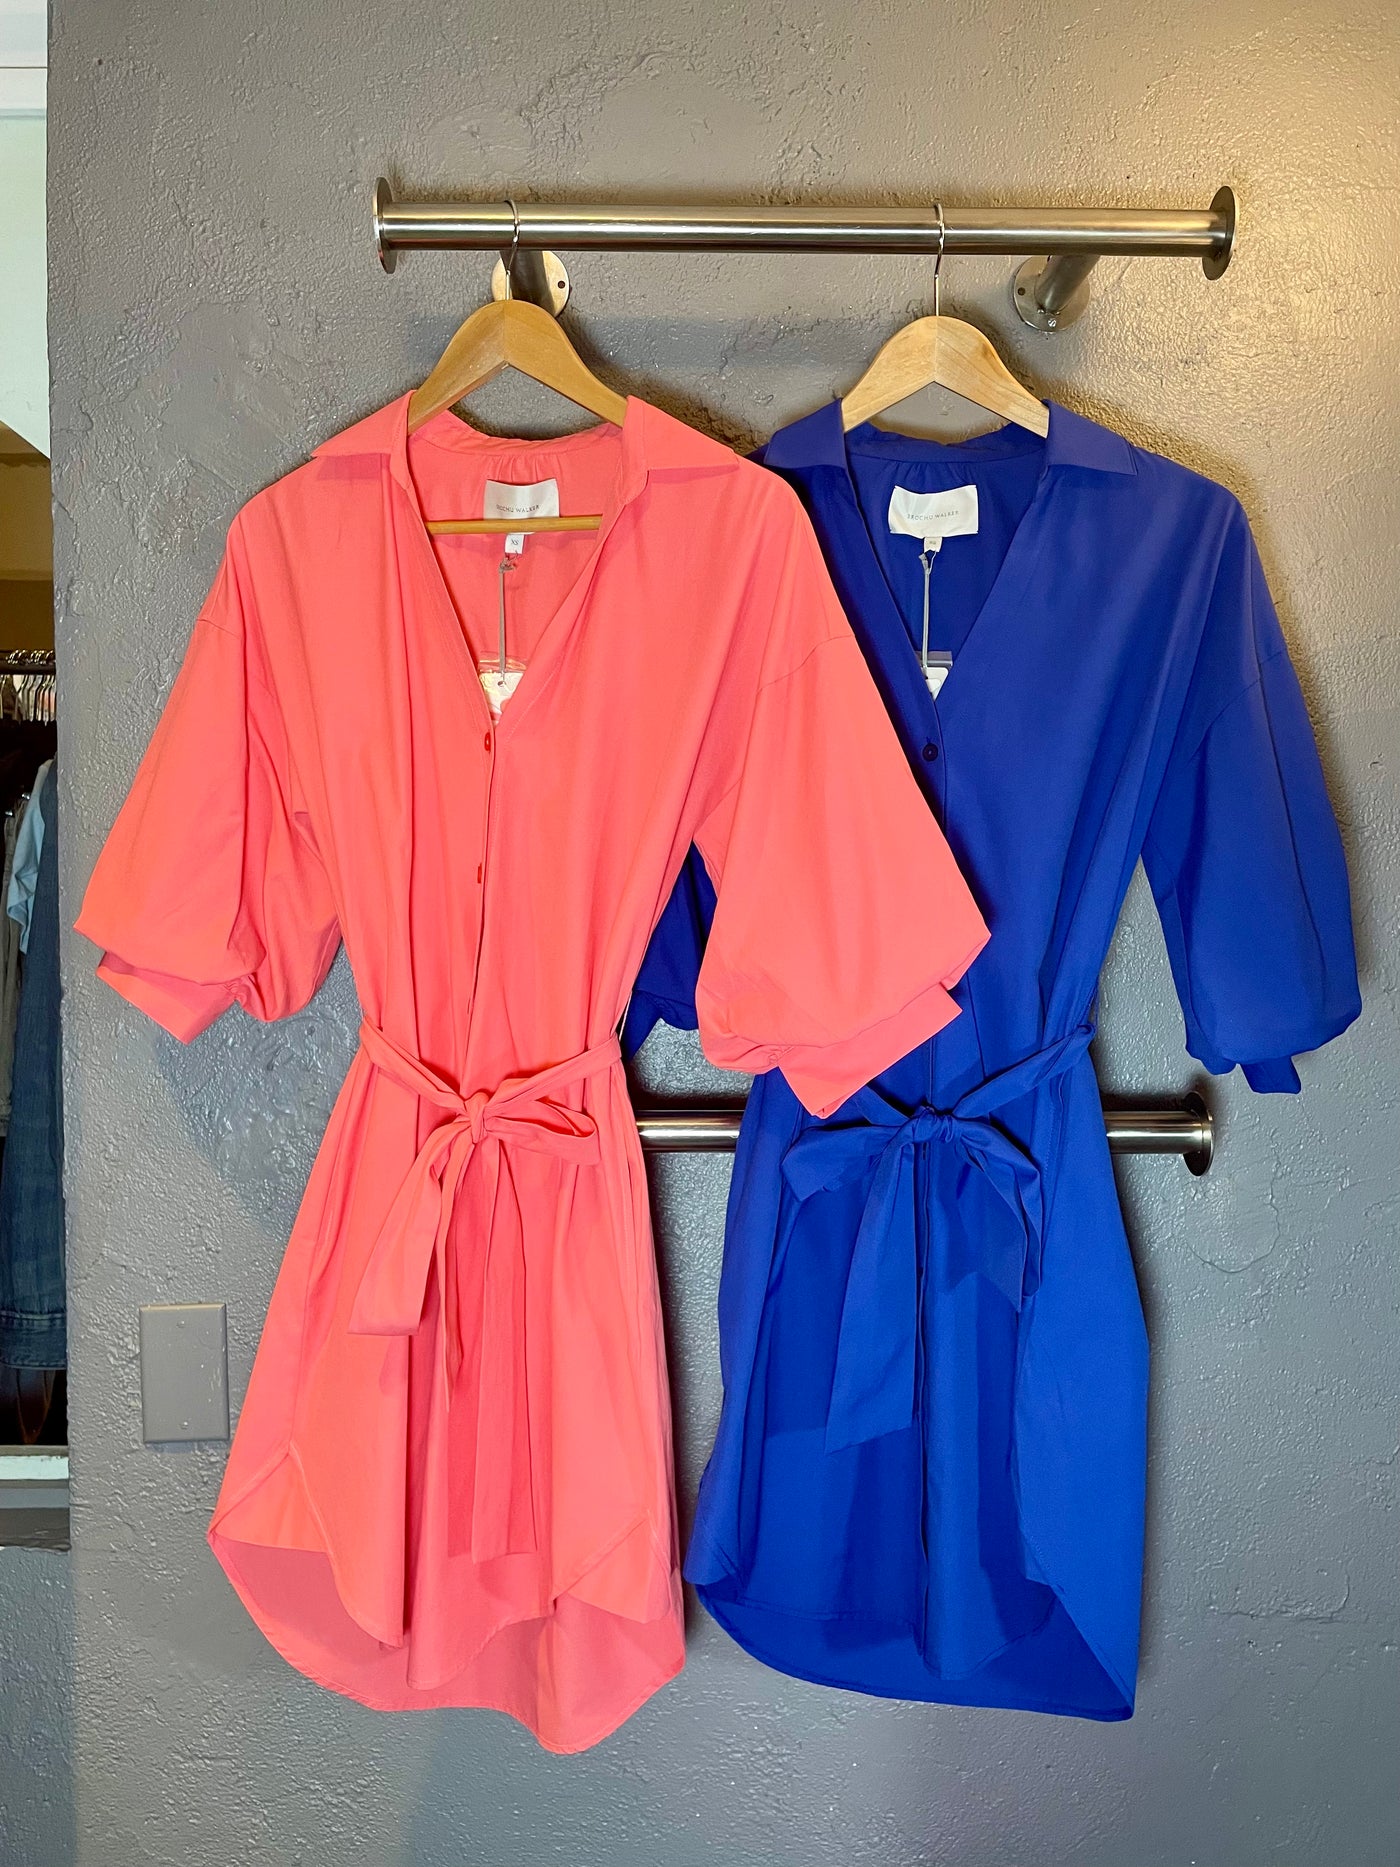 KATE BELTED DRESS IN BRIGHT CORAL - Romi Boutique